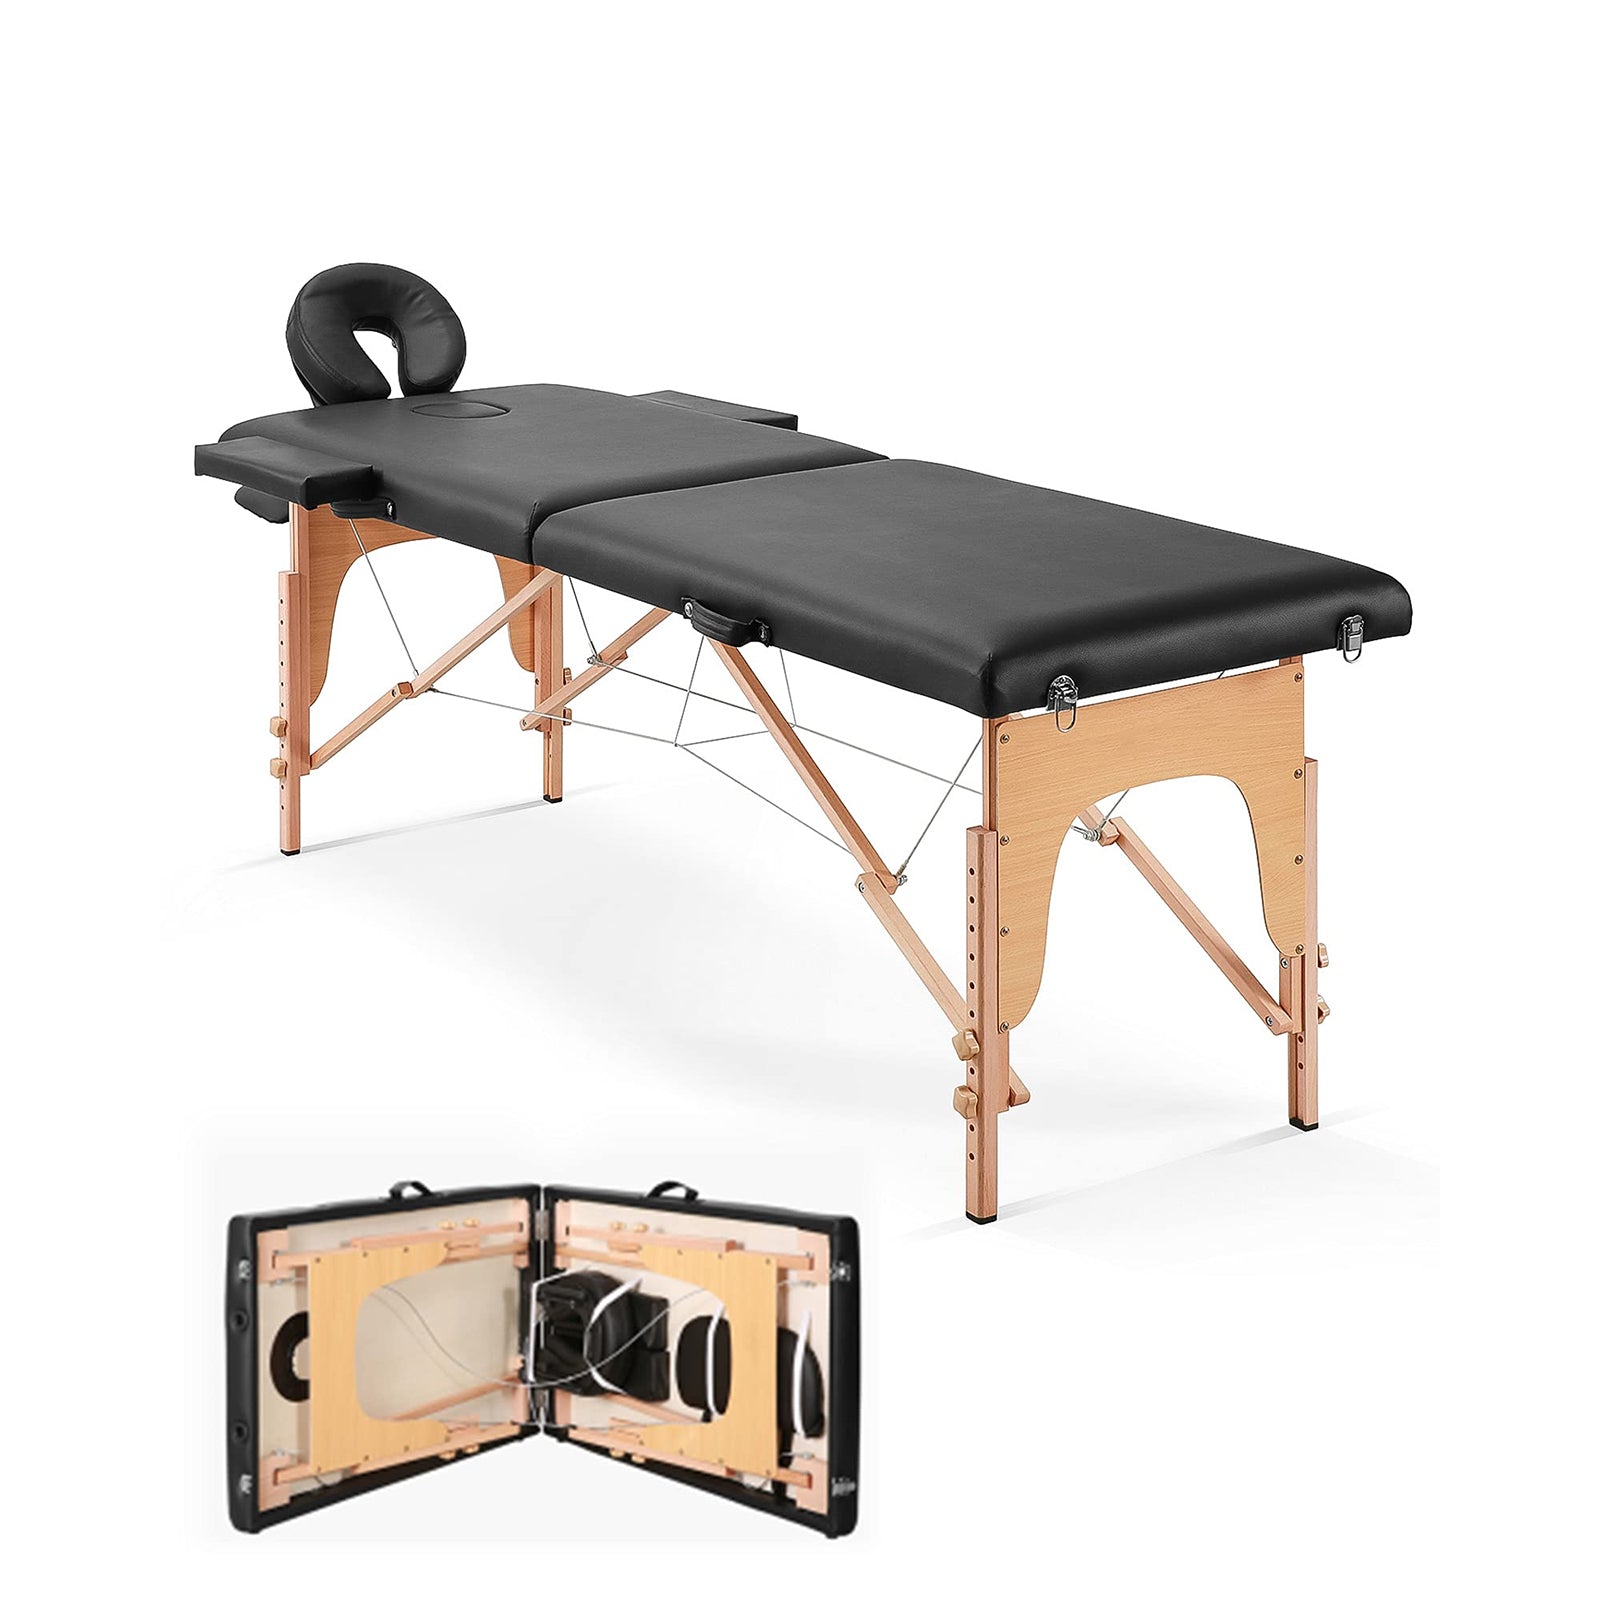 Load image into Gallery viewer, Massage Table Portable 2 Sections Massage Table, Height Adjustable with Headrest, Armrest, Carrying Bag - Black
